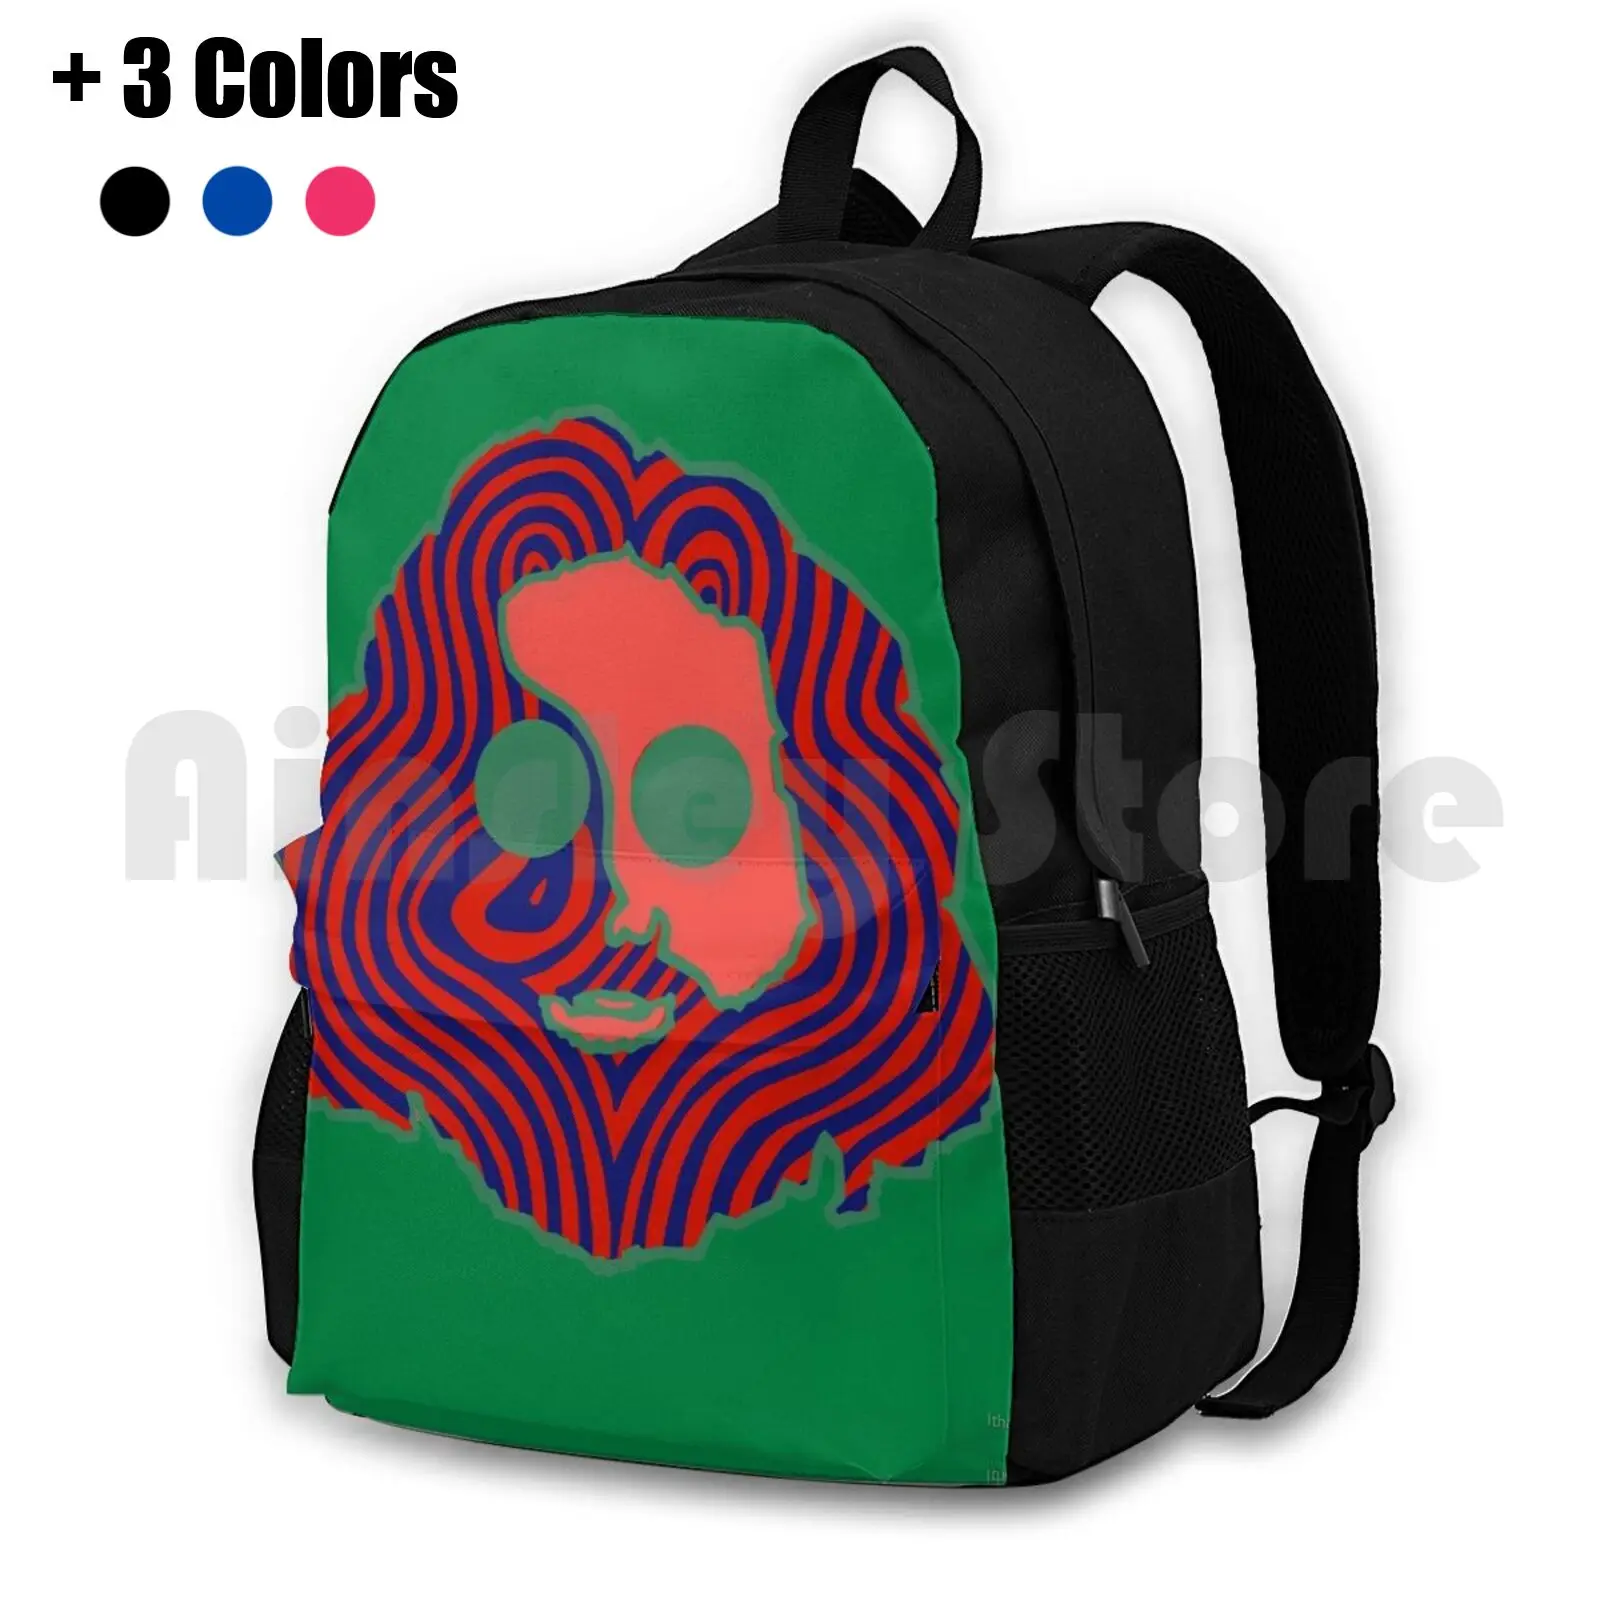 

Jerry Face Outdoor Hiking Backpack Riding Climbing Sports Bag Jerry Grateful Dead Jam Band Portrait Tour Trippy Stylized Cutout